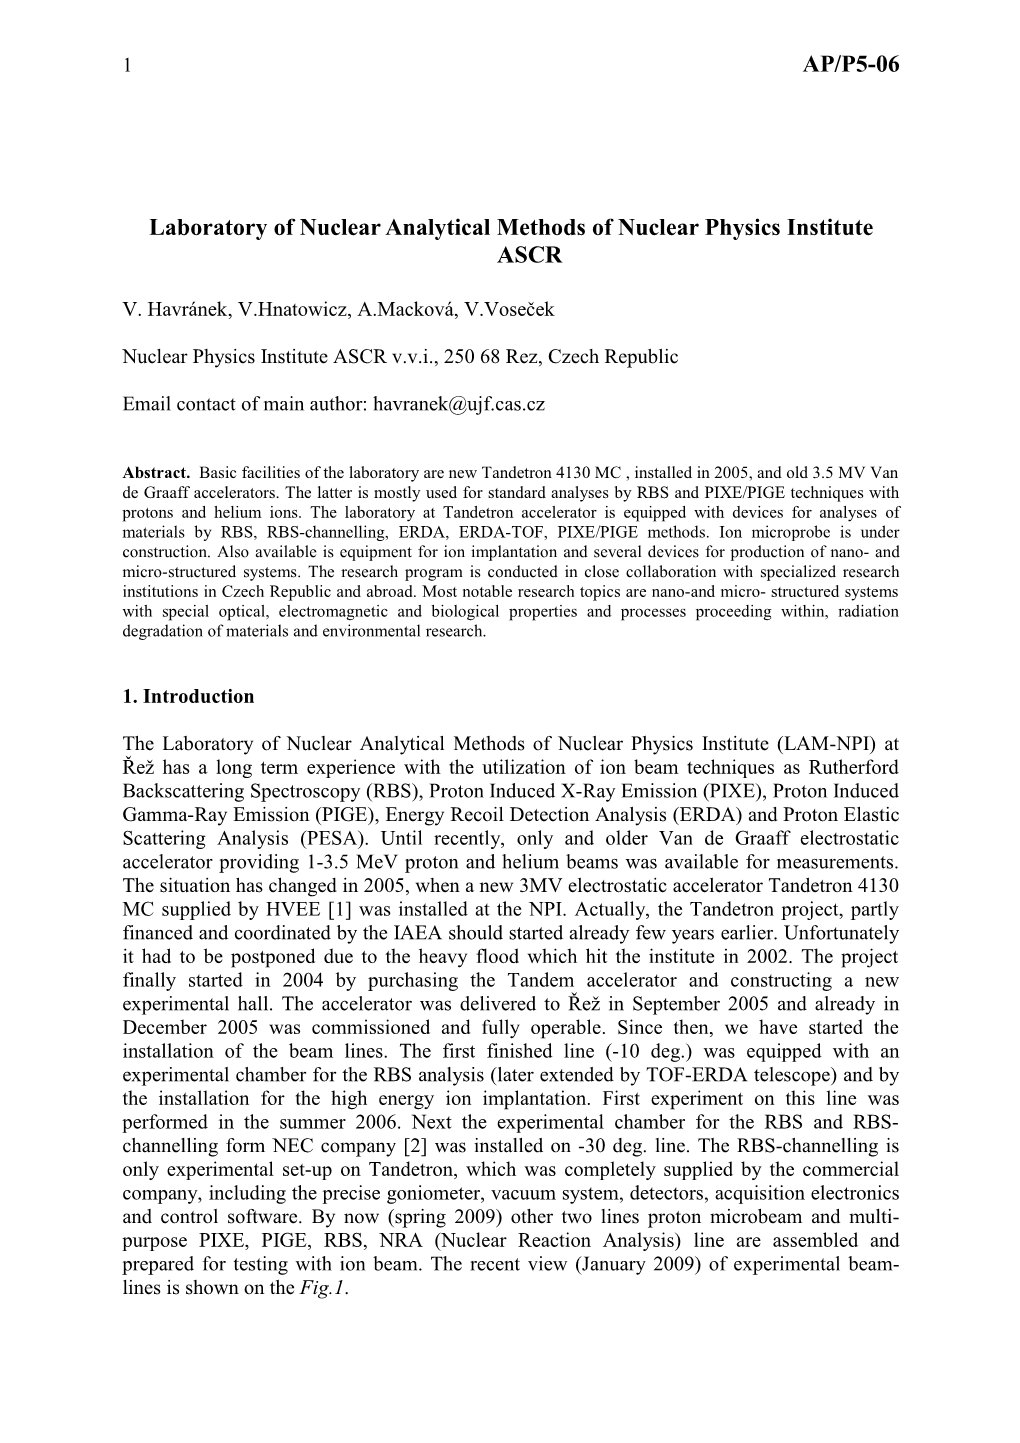 AP/P5-06 Laboratory of Nuclear Analytical Methods of Nuclear